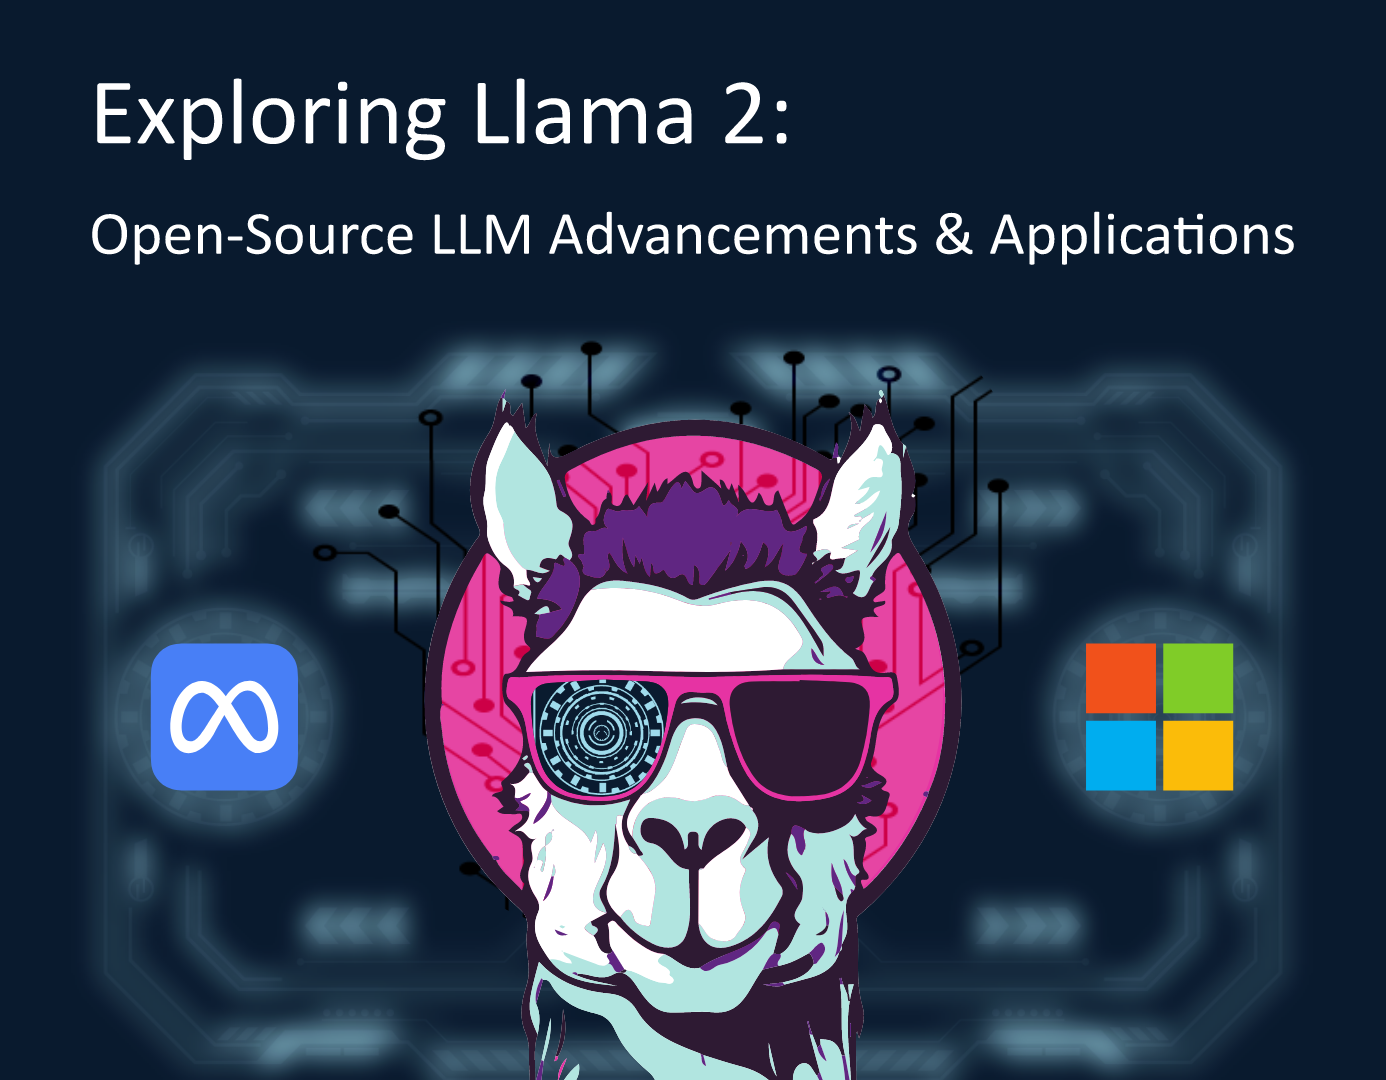 Blog, Exploring Llama 2: Open-Source LLM Advancements & Applications, Meta's open-source language model, featuring versions, tasks, Hugging Face integration, and implementation in Google Colab for diverse text tasks